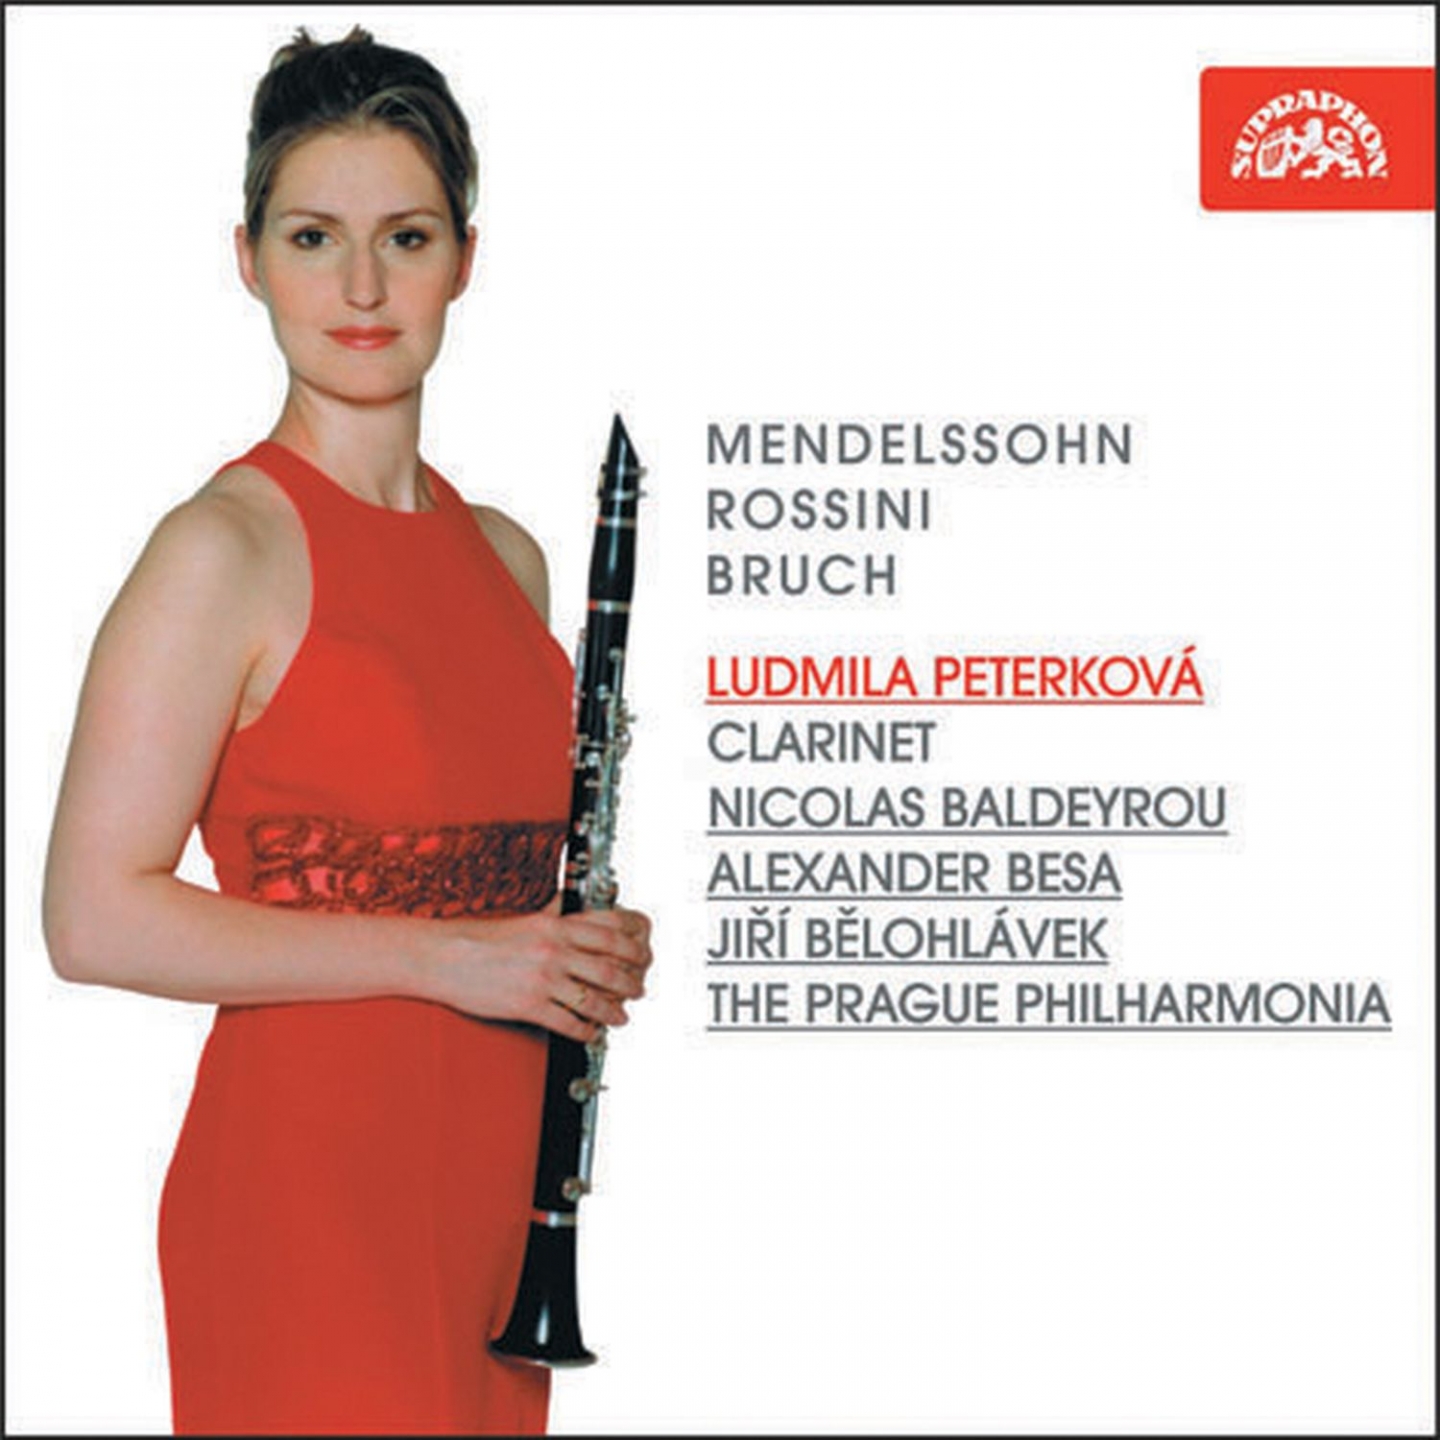 Mendelssohn, Rossini and Bruch: Works for Clarinet and Orchestra